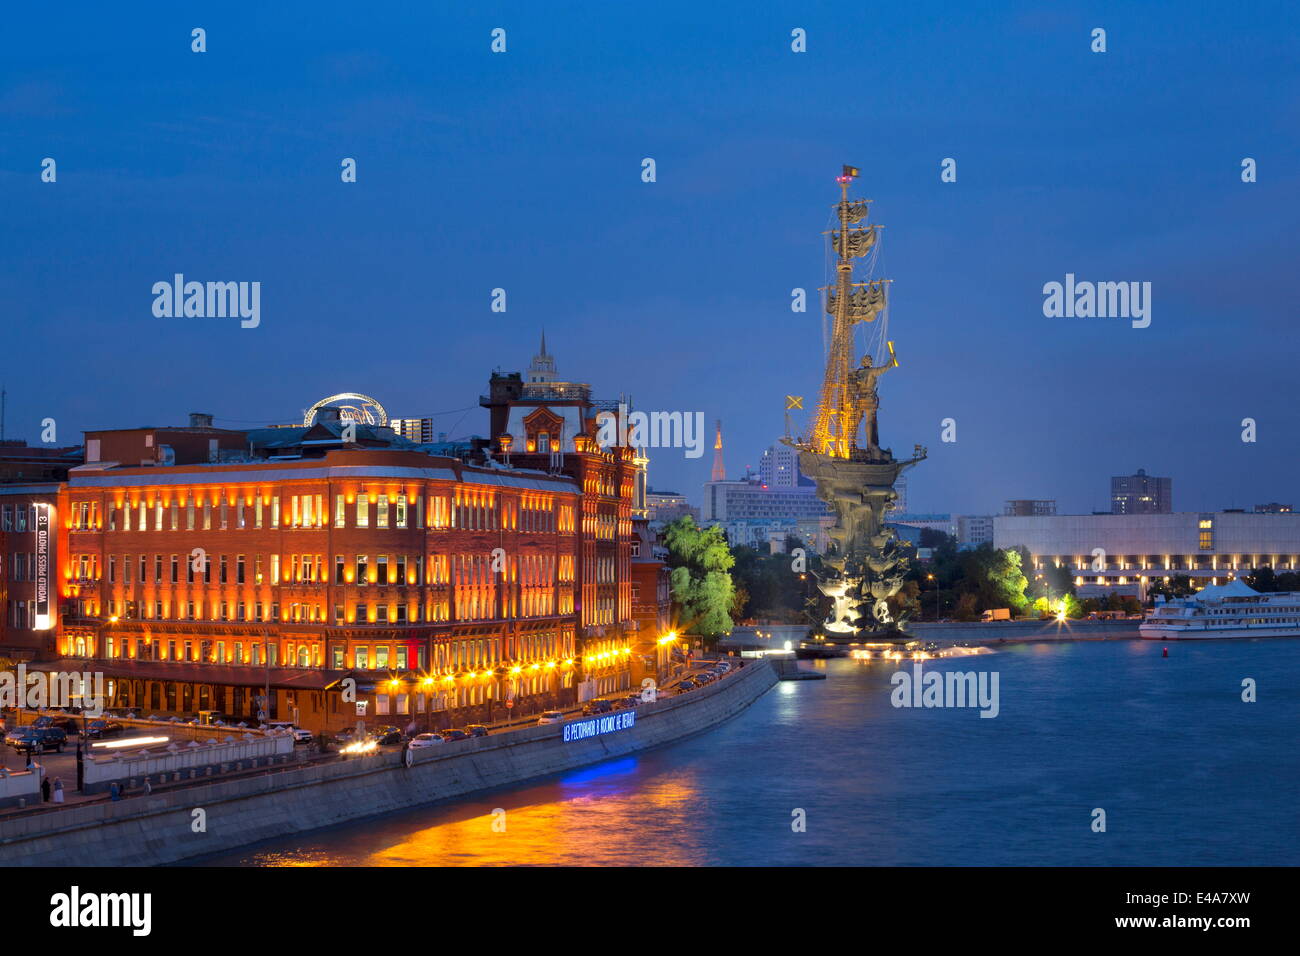 Peter The Great Statue and River Moskva at night, Moscow, Russia, Europe Stock Photo